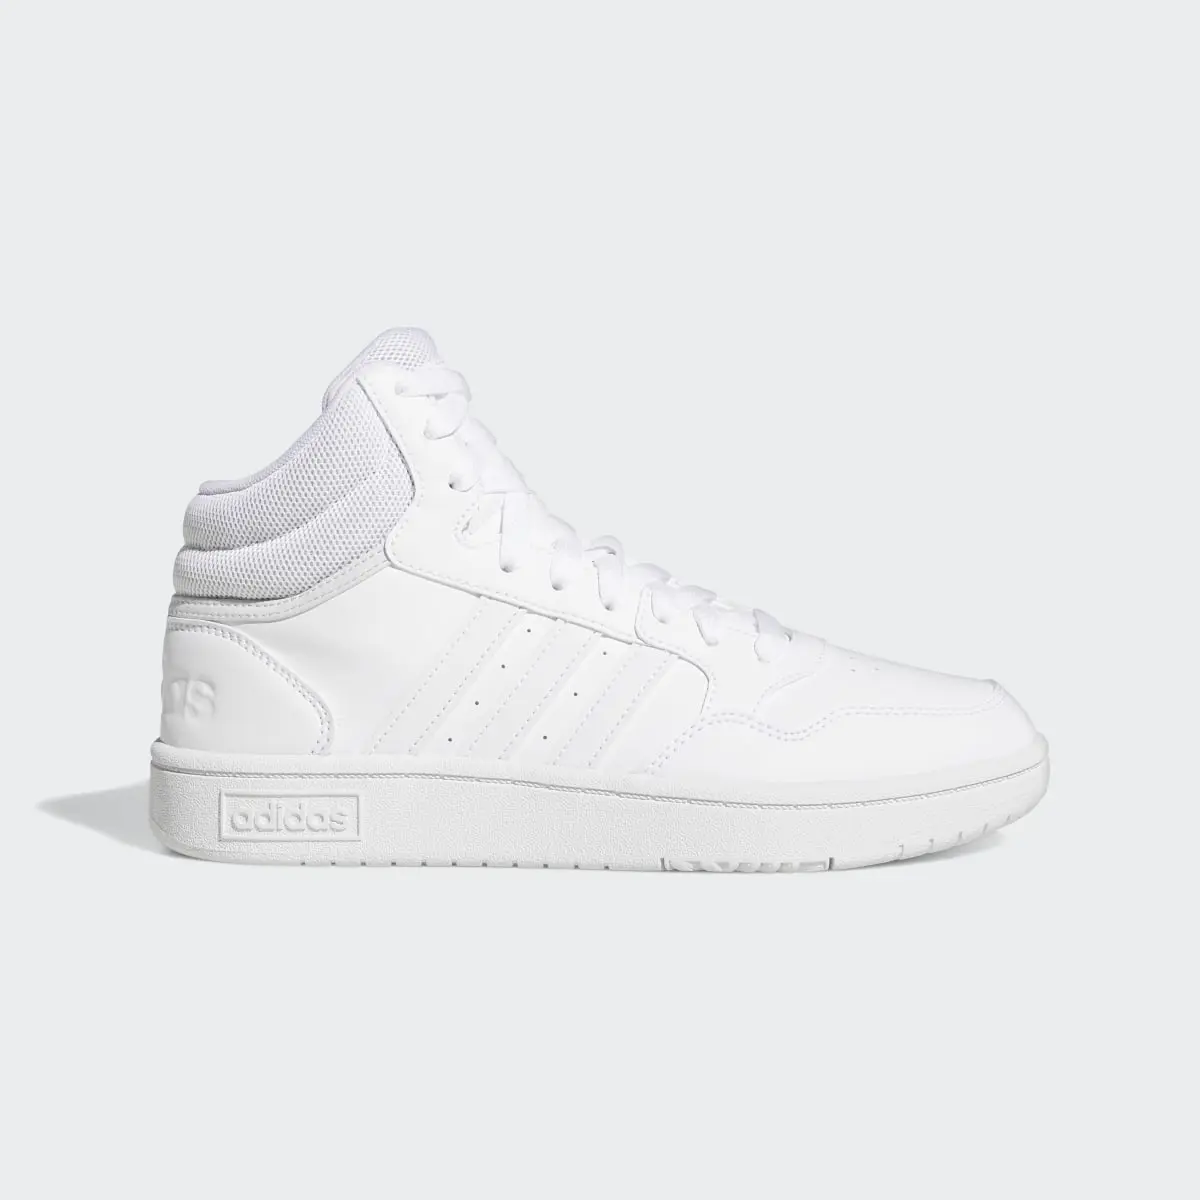 Adidas Hoops 3.0 Mid Classic Shoes. 2